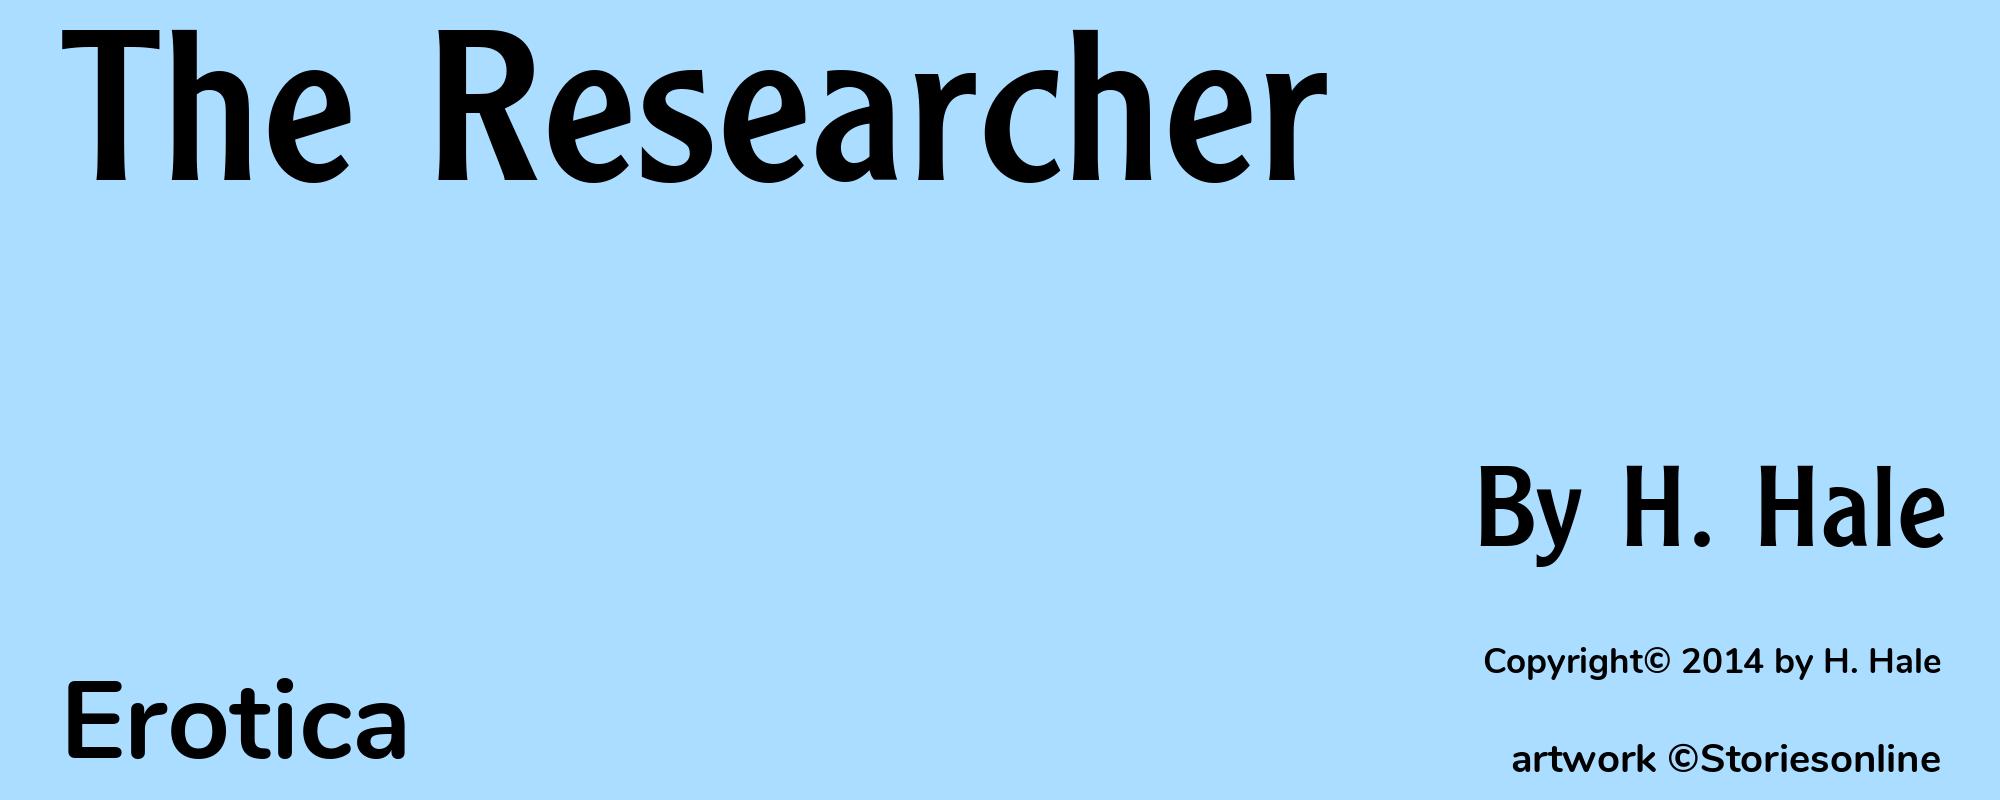 The Researcher - Cover